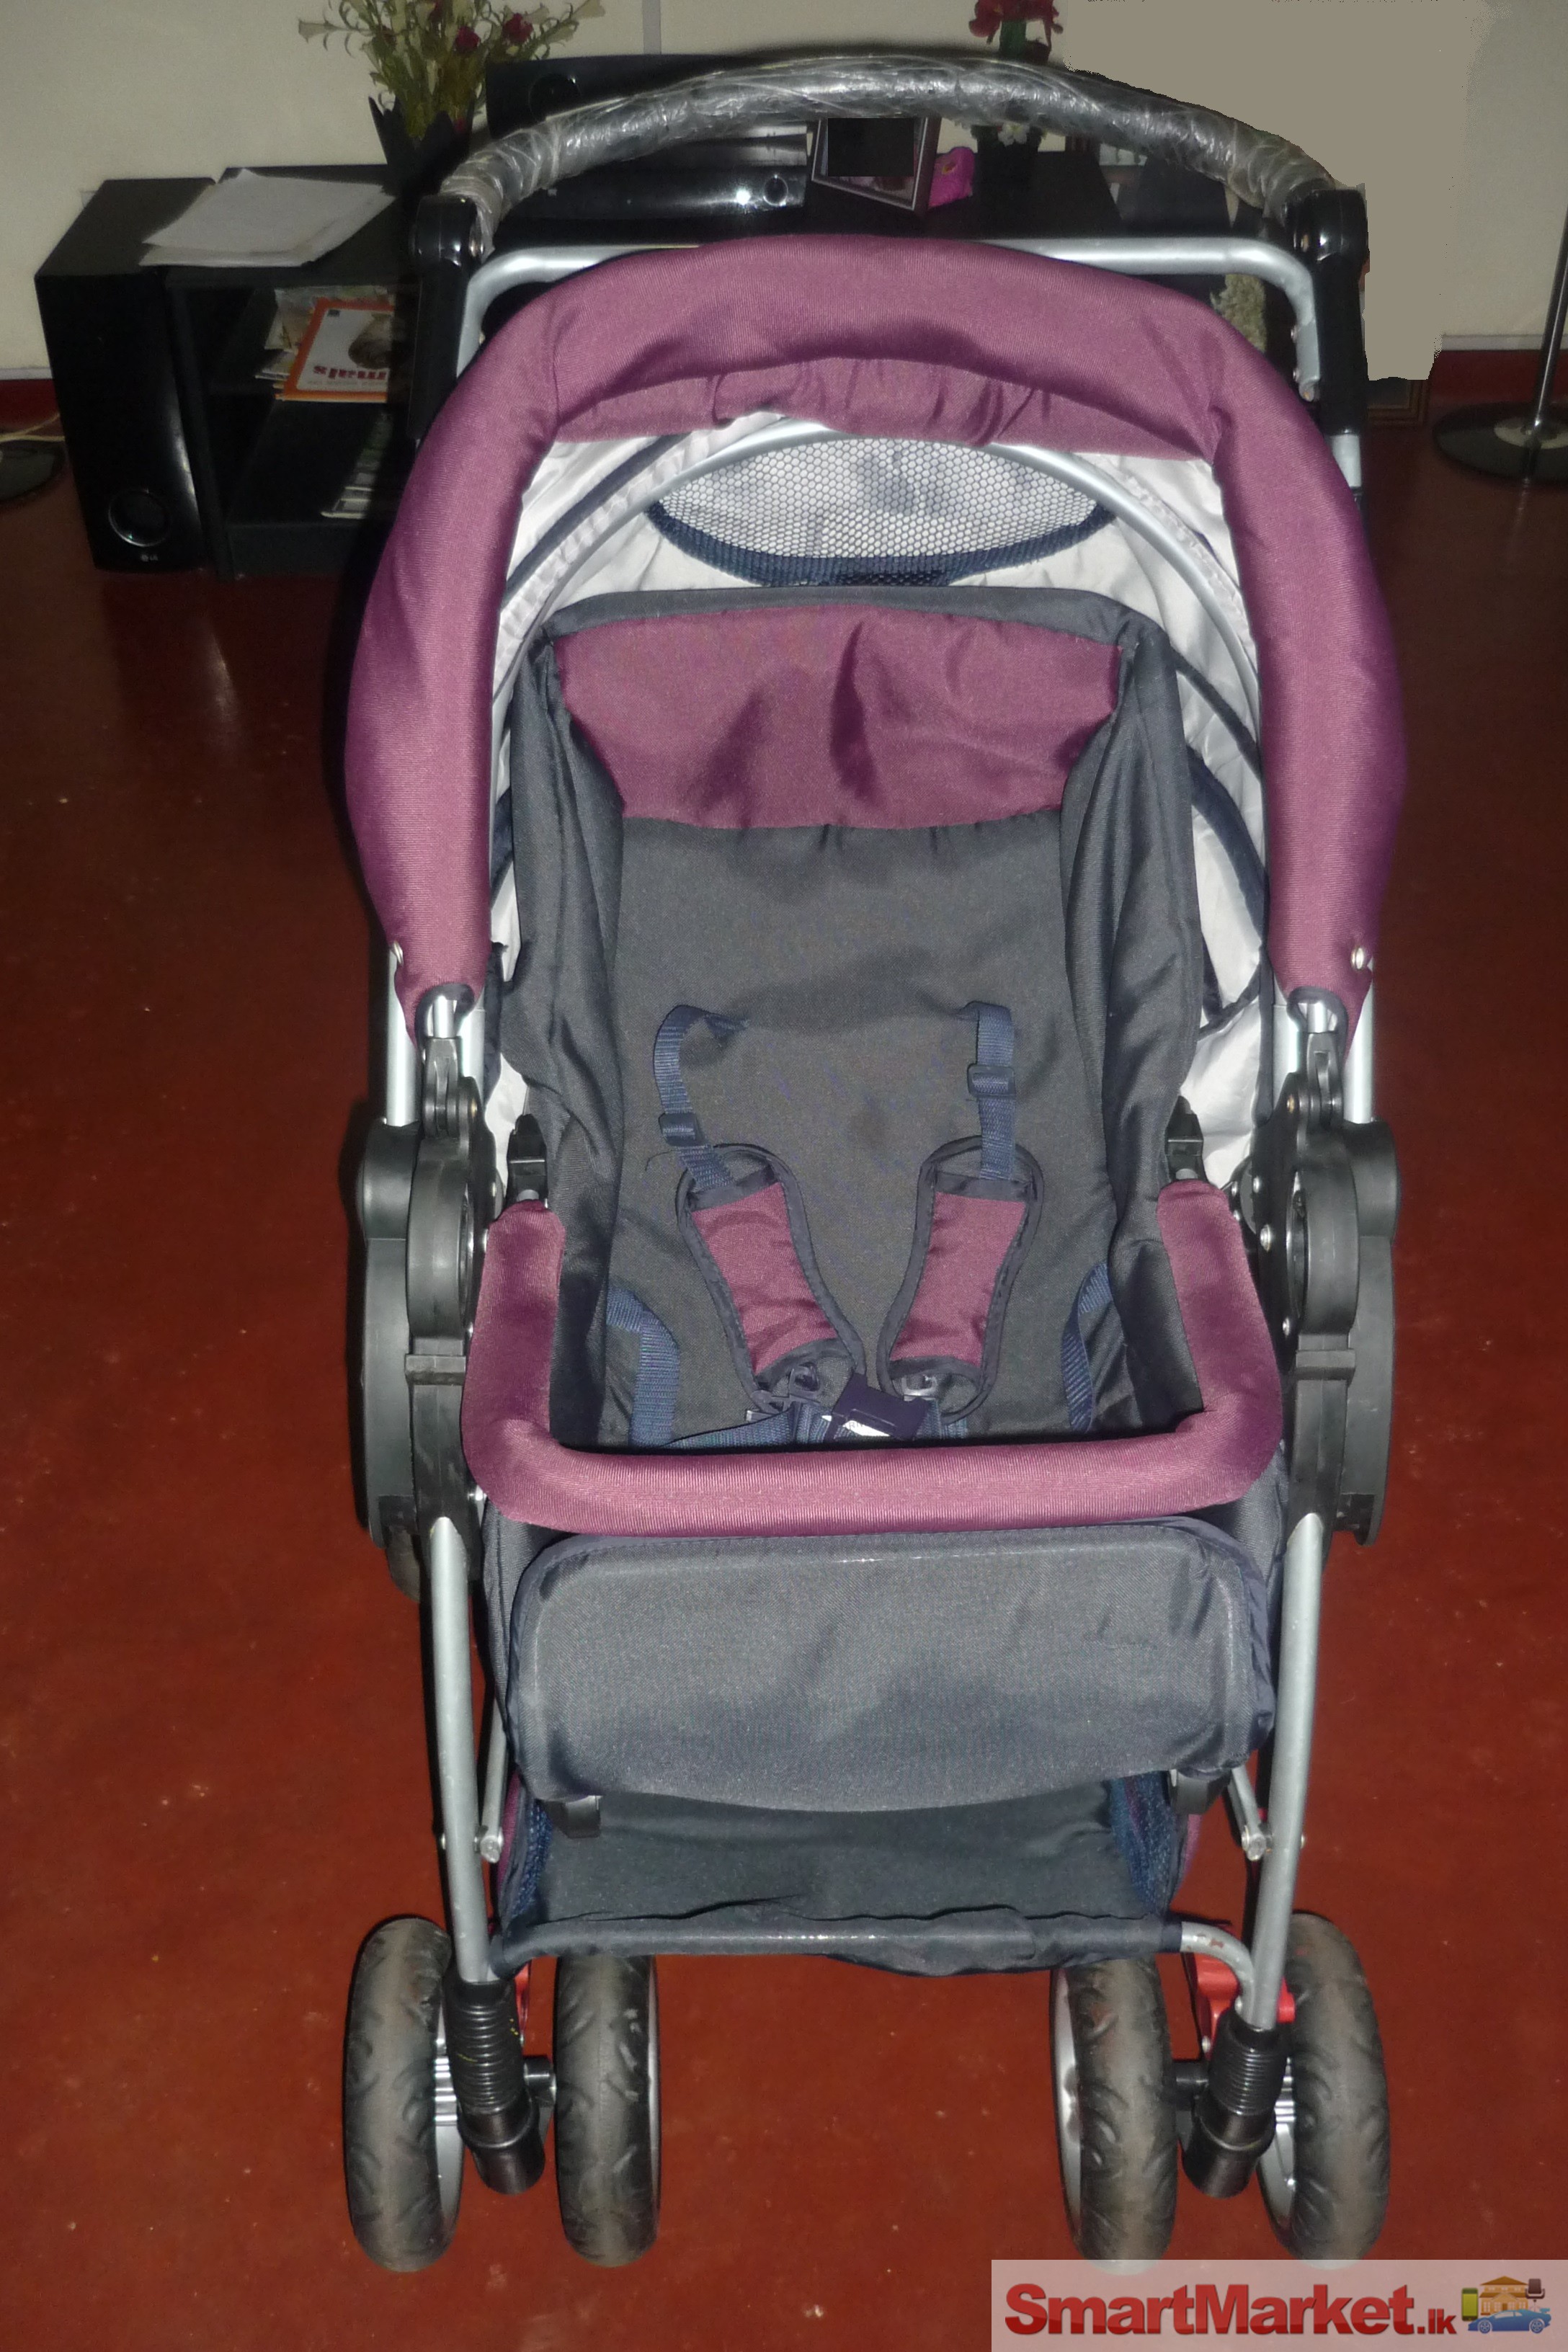 Baby stroller with excellent condition